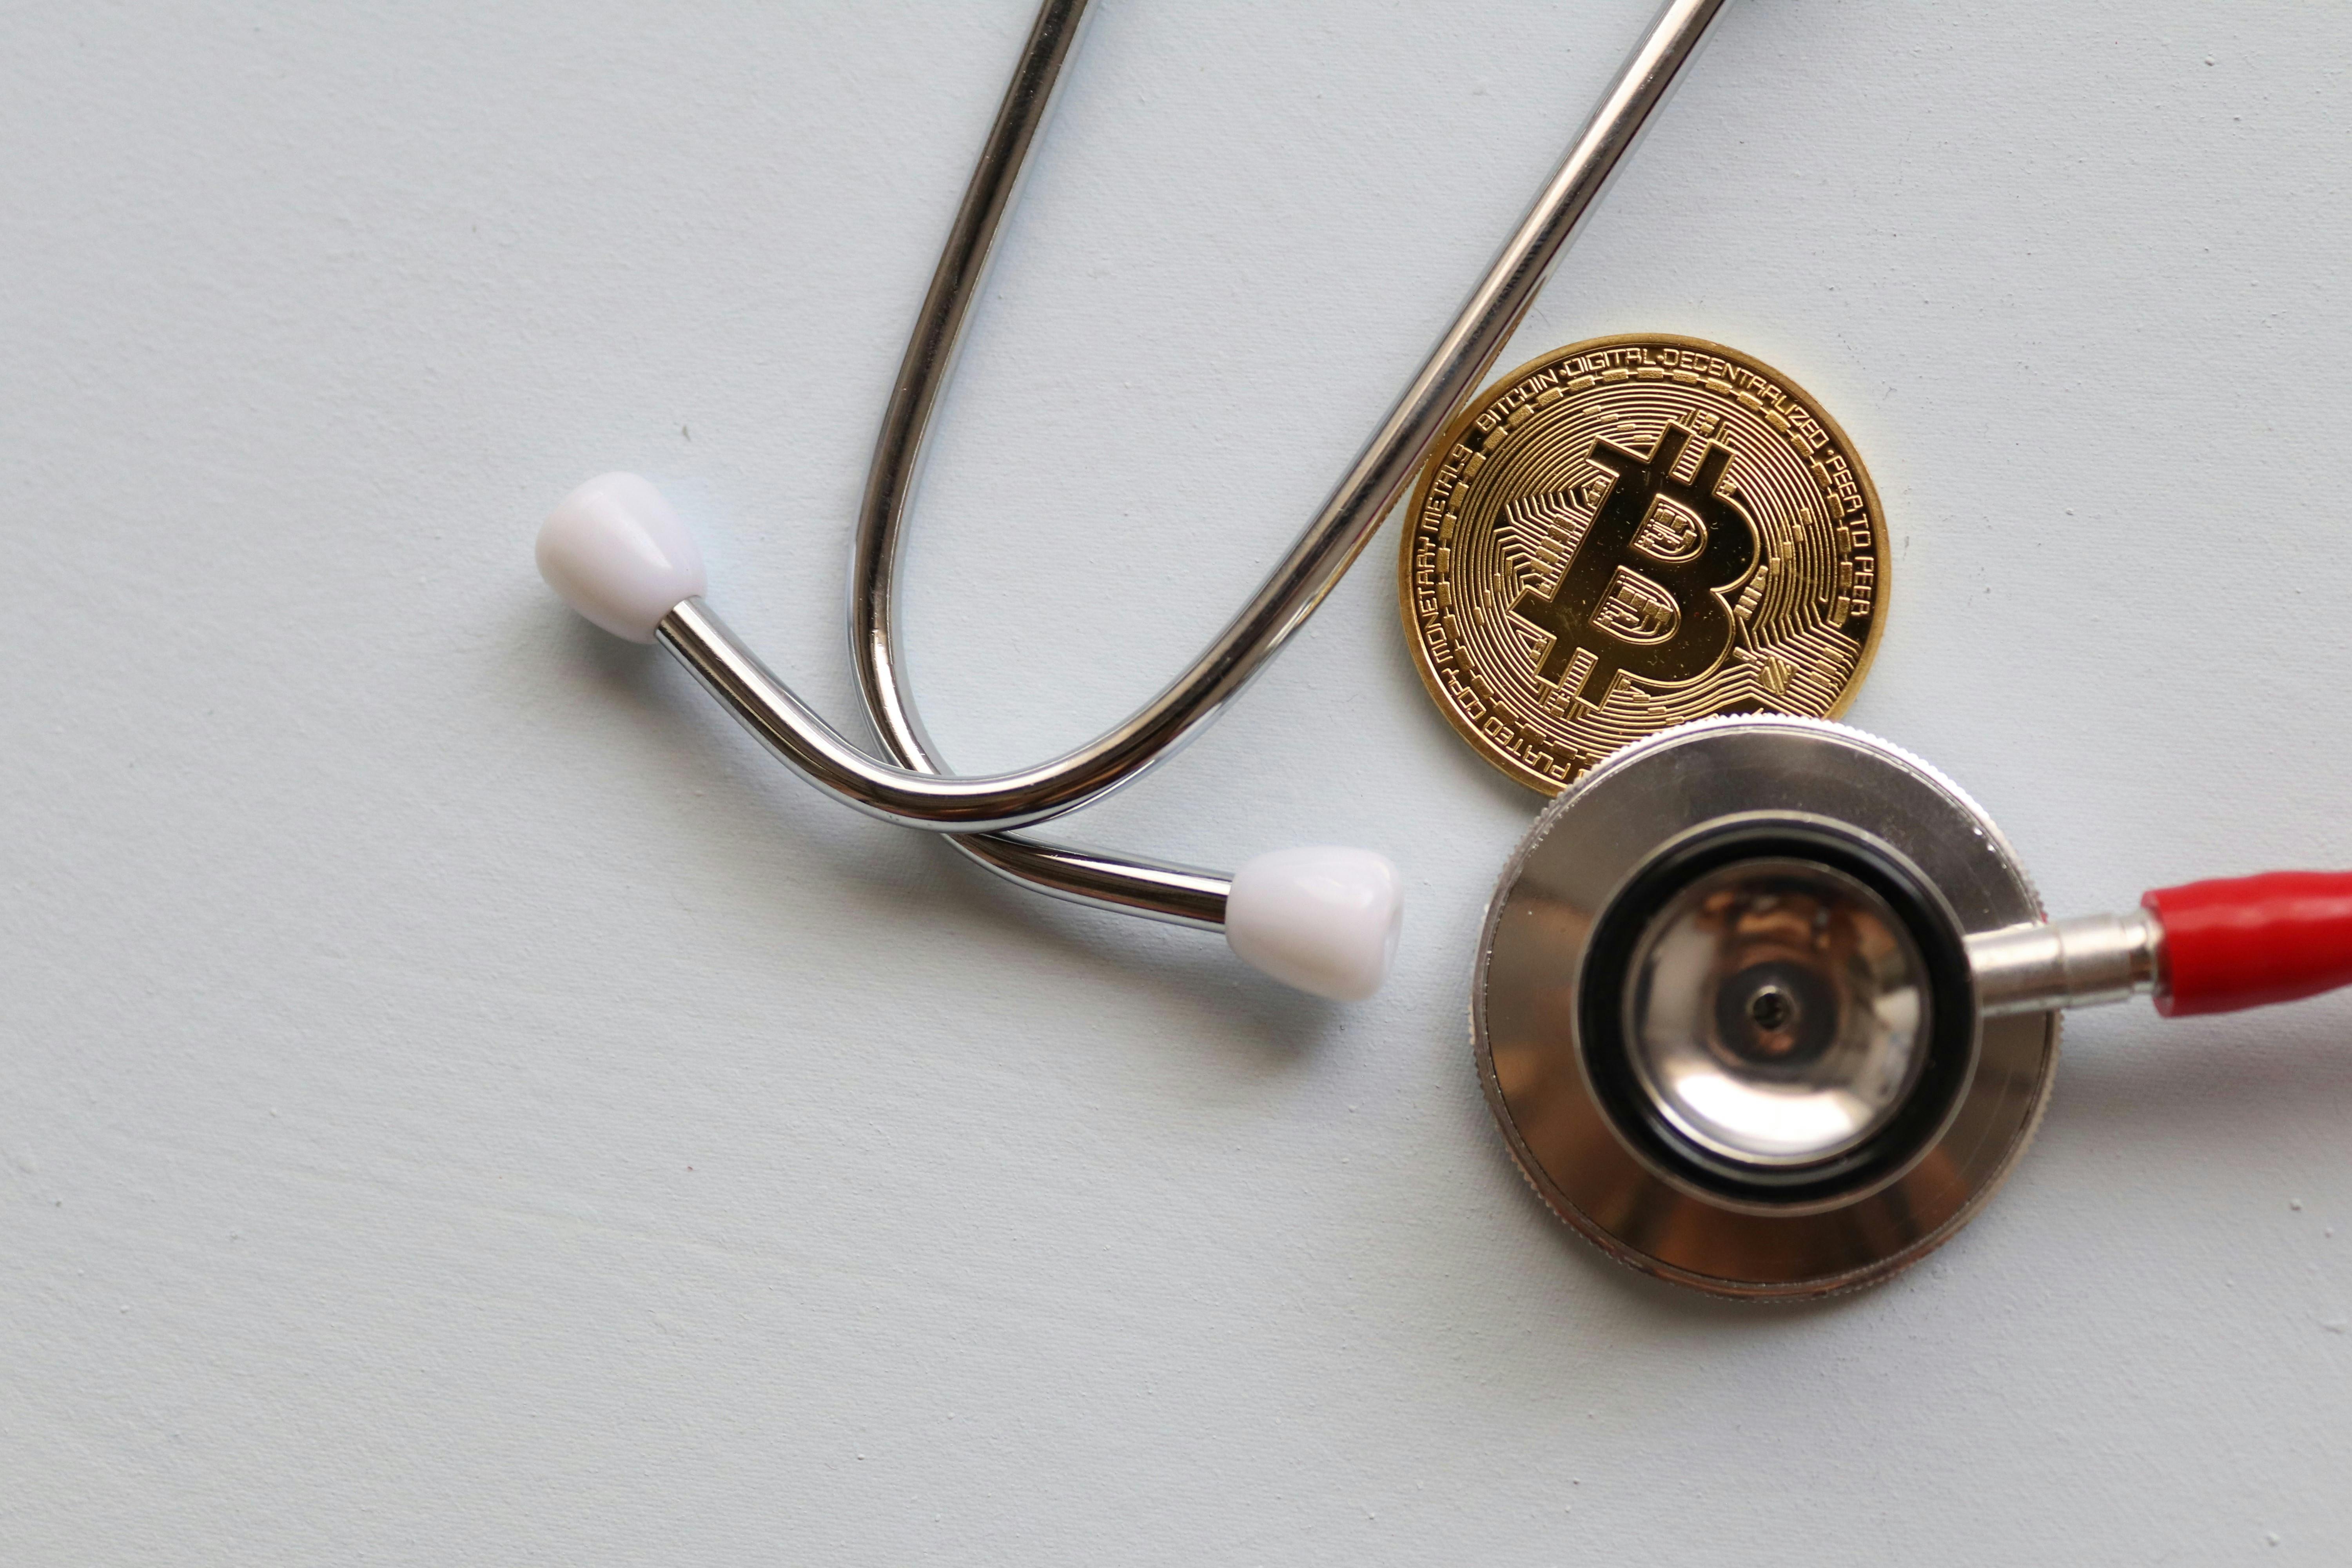 stethoscope and bitcoin on white surface